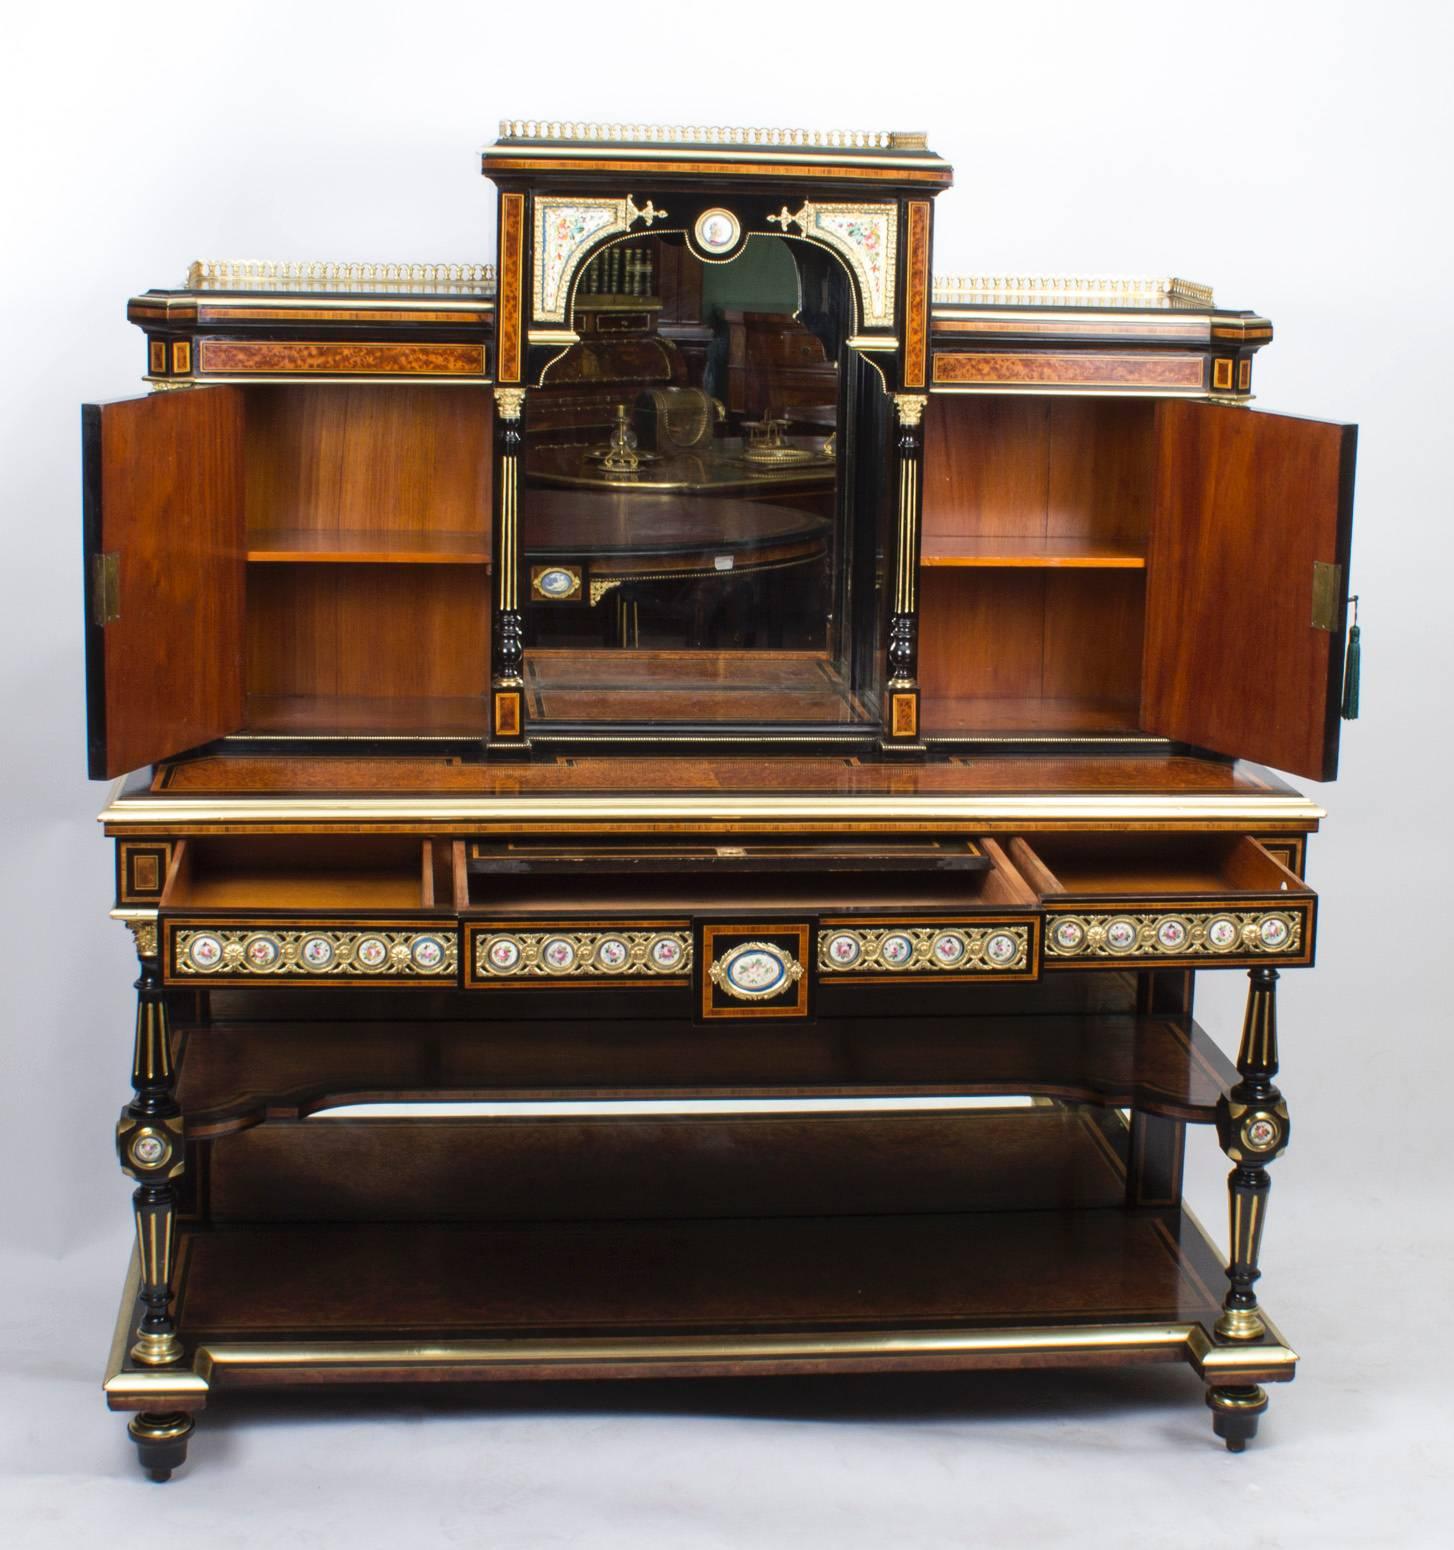 This is a gorgeous Victorian amboyna, ebonised and ormolu-mounted Bonheur Du Jour or ladies writing desk, circa 1860 in date.

Surmounted by decorative pierced brass galleries, it is made from amboyna and the rare thuya wood, the whole decorated